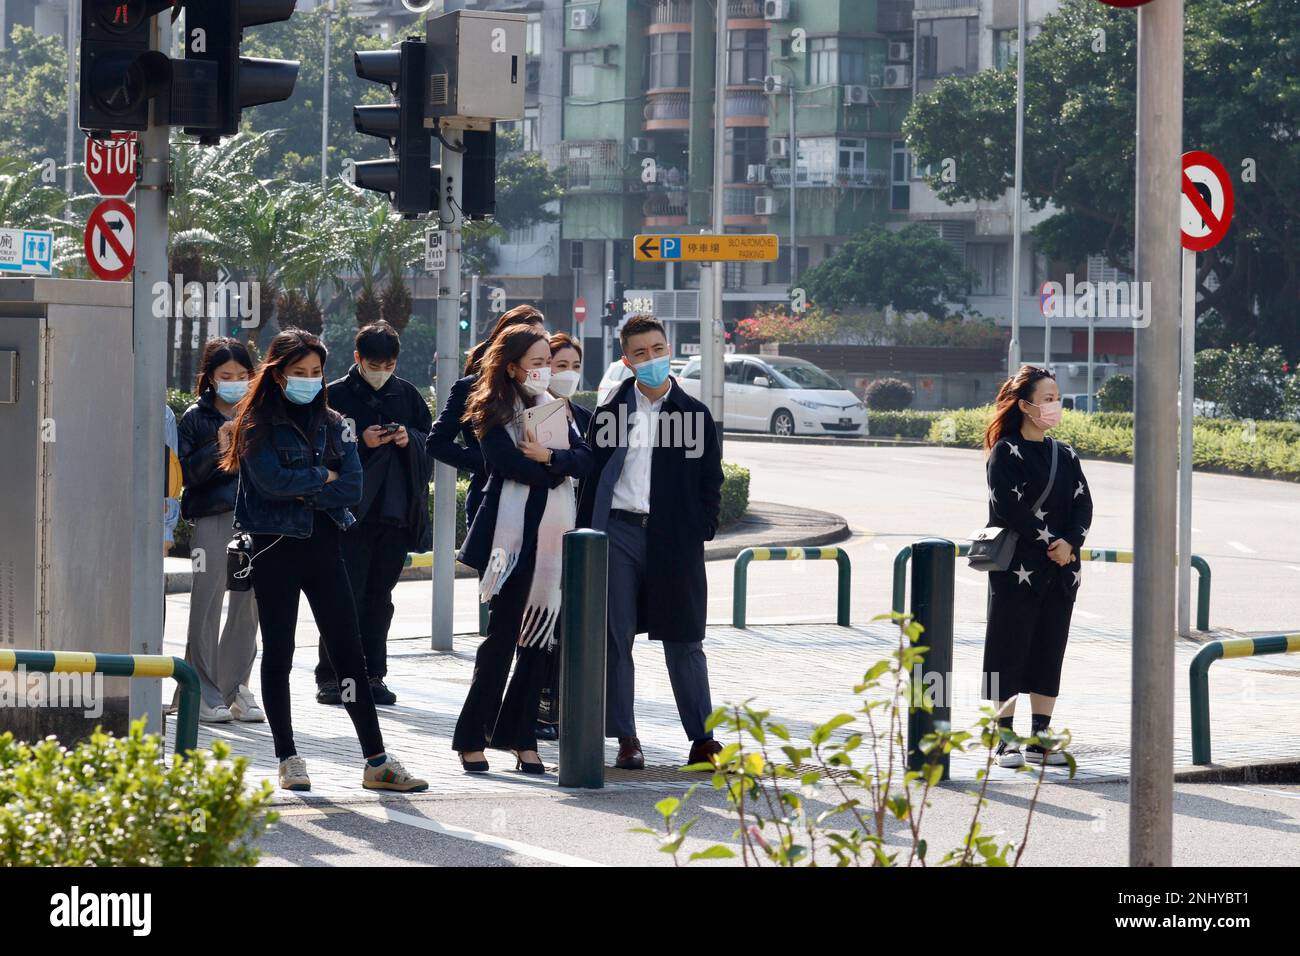 Women and men standing on a street corner in Macau, waiting for the light to change Stock Photo